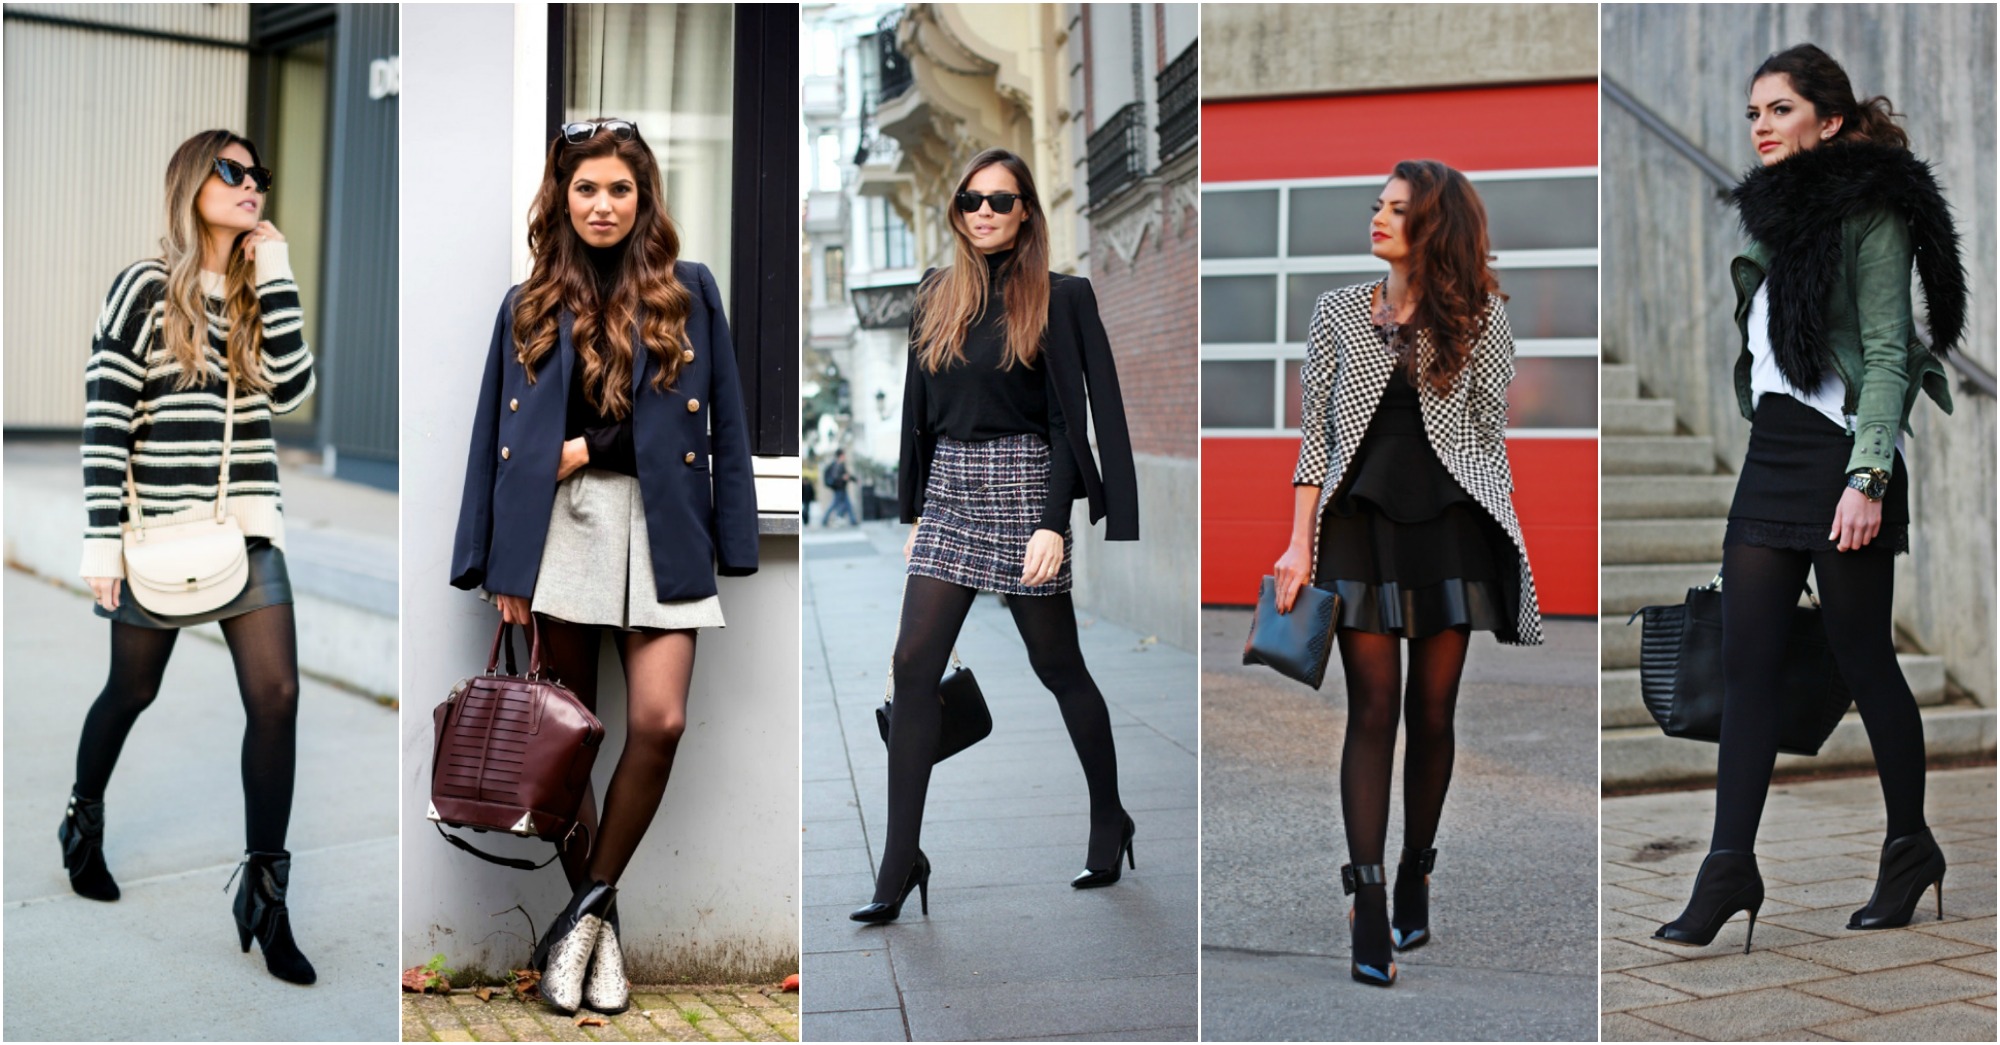 15 Fabulous Ways To Wear Black Tights You Should Not Miss - fashionsy.com